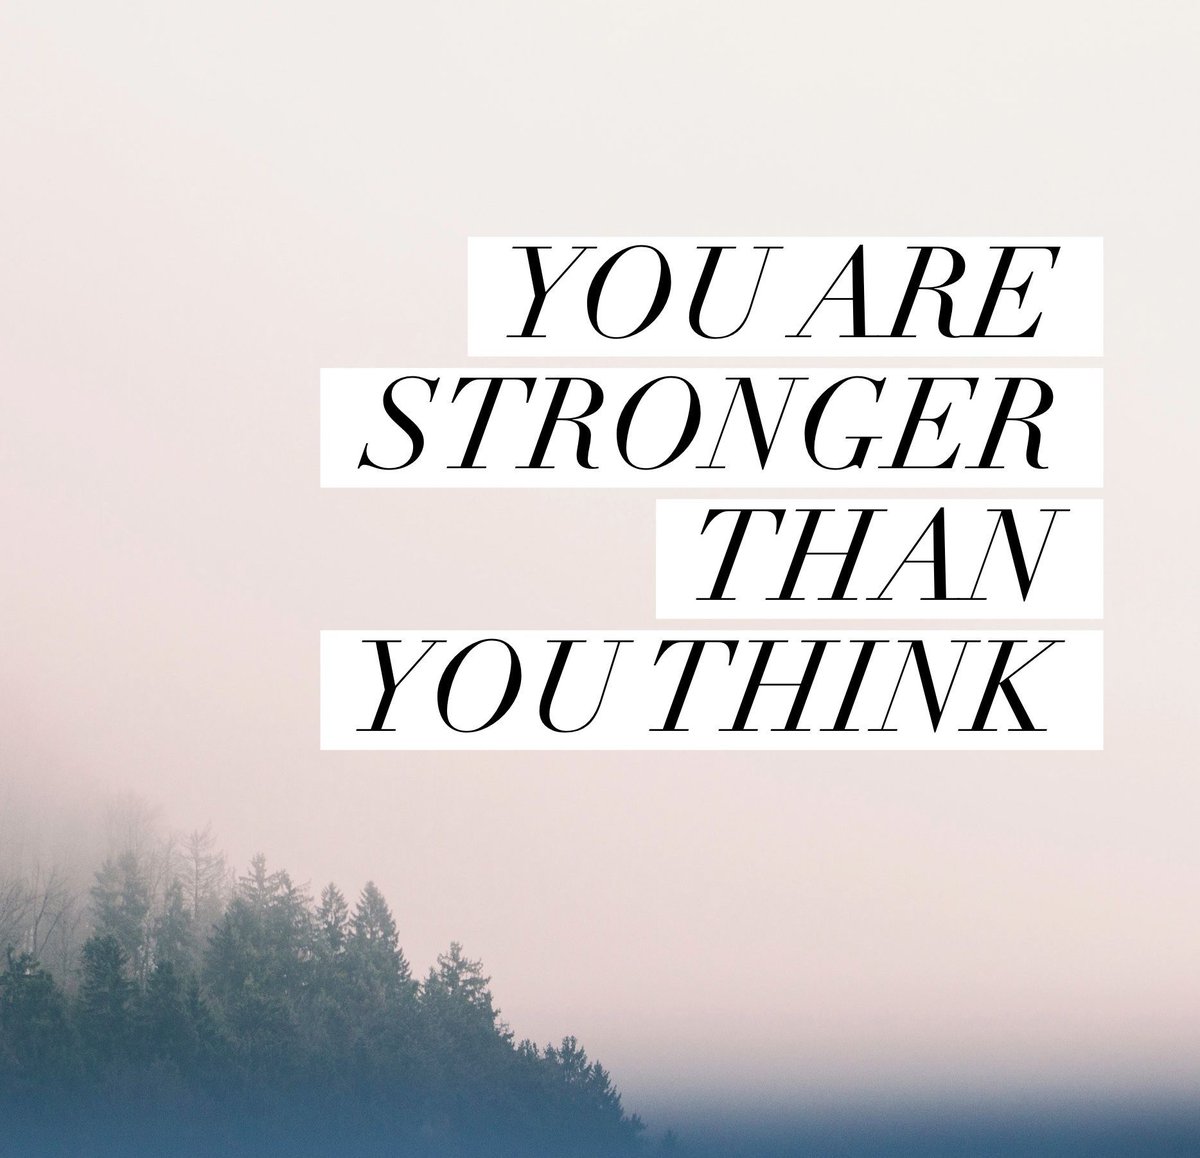 We are our greatest critics and our thoughts can be naturally and inappropriately negative. 

You ARE stronger than you may feel

#strength #power #strongertogether #strongerUNited #stronger #livehigher #keystohappiness #internalstrength #higherpower #brainmeltdfacts #brainhealth